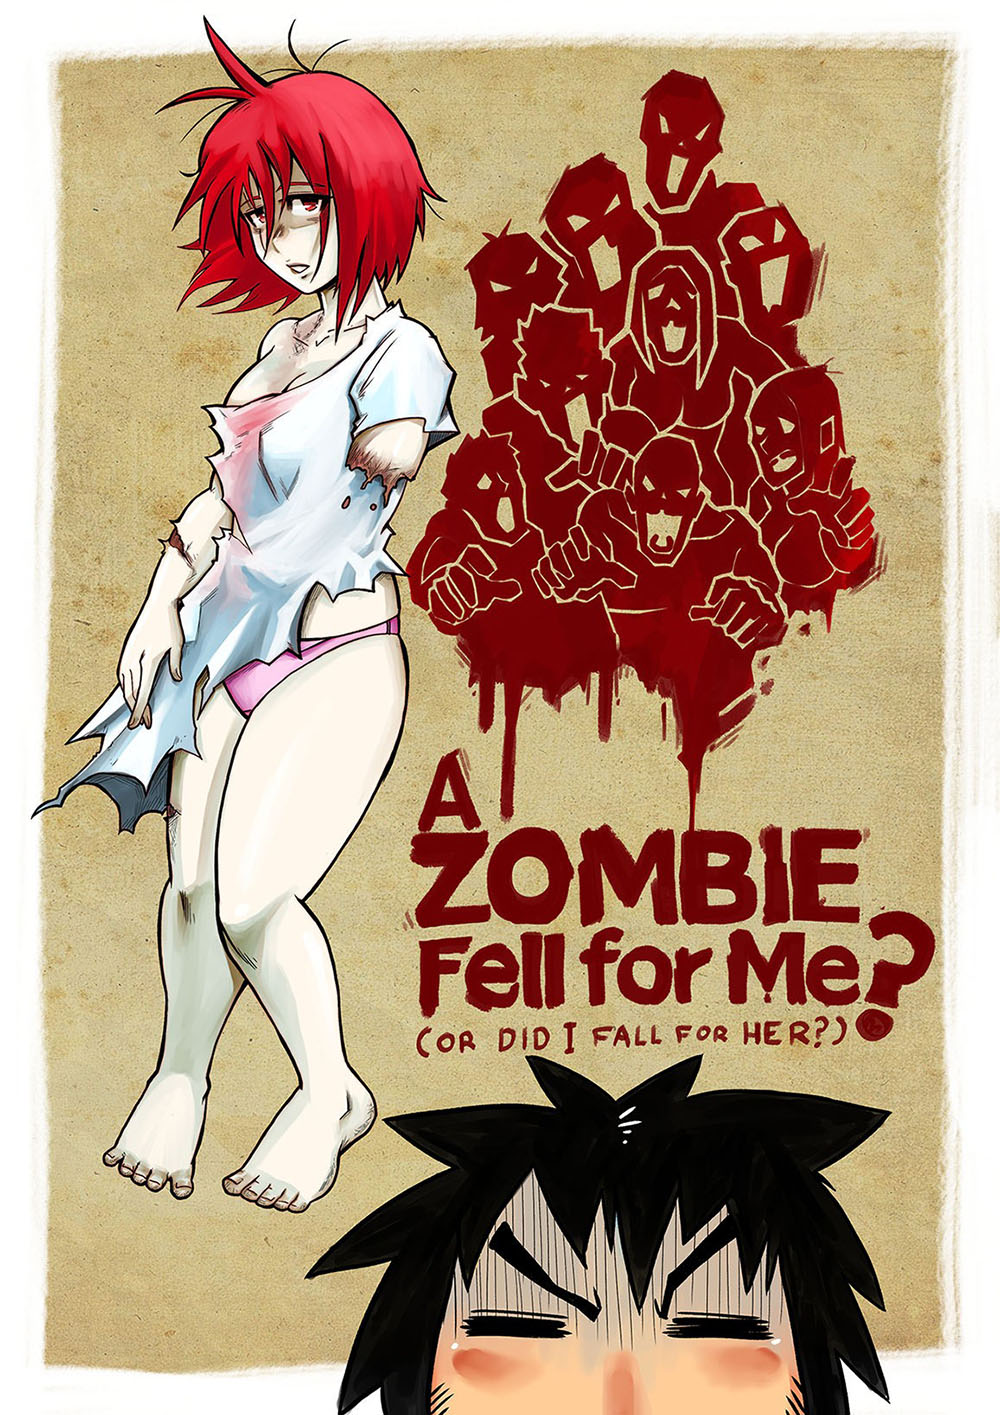 A ZOMBIE fell for me?